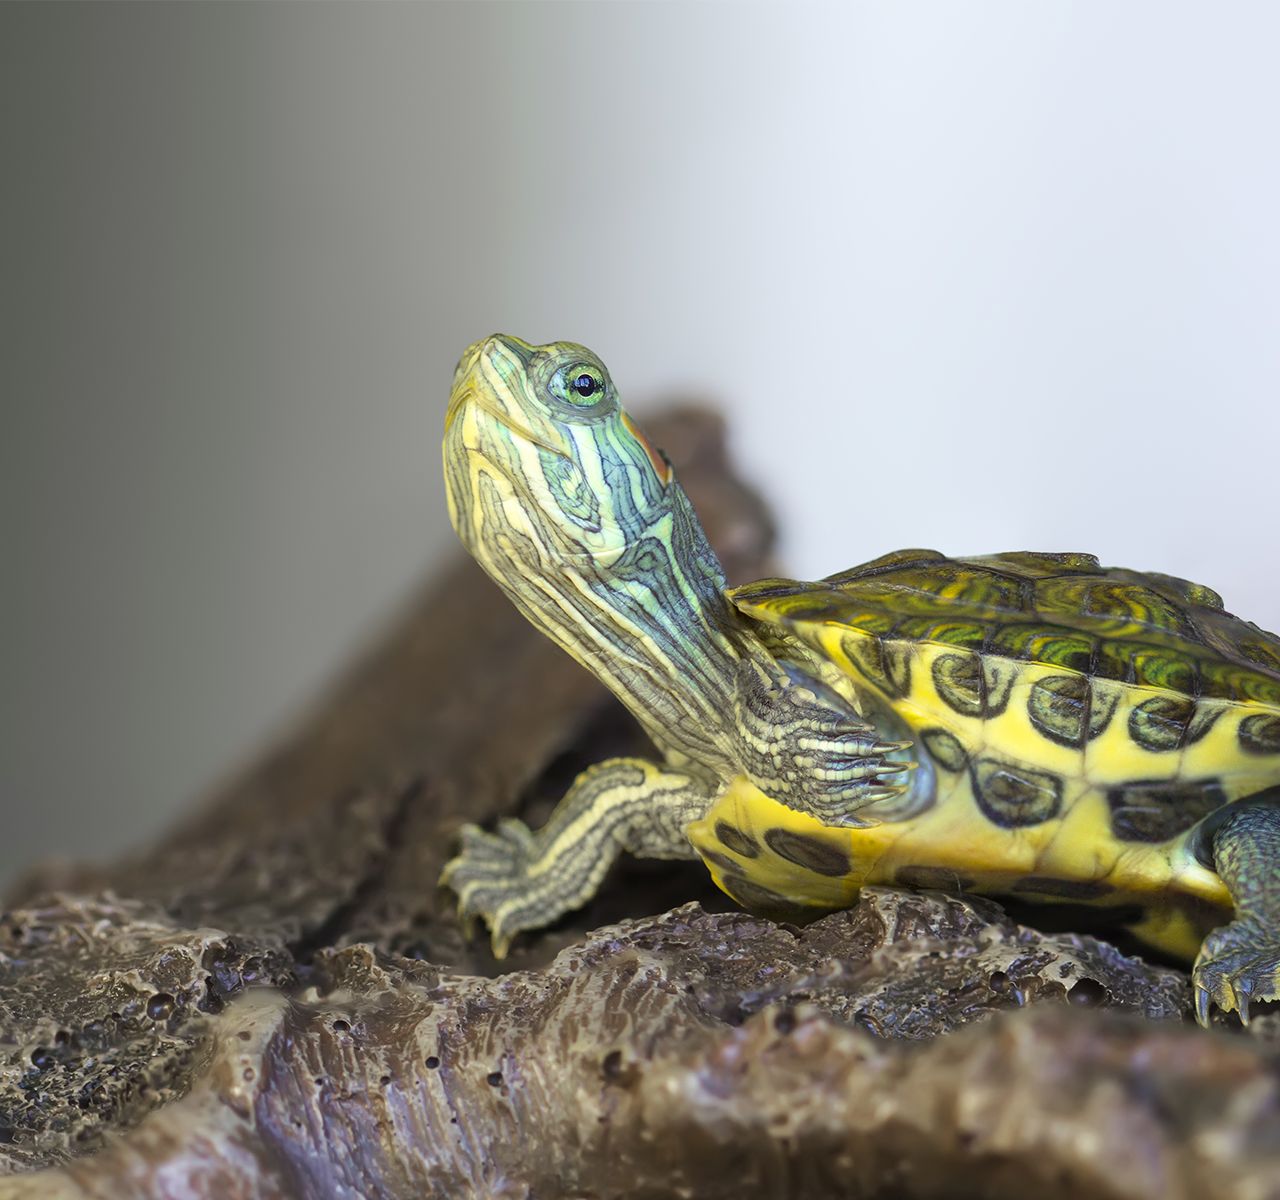 10 Things You Need to Know About Keeping Reptiles as Pets